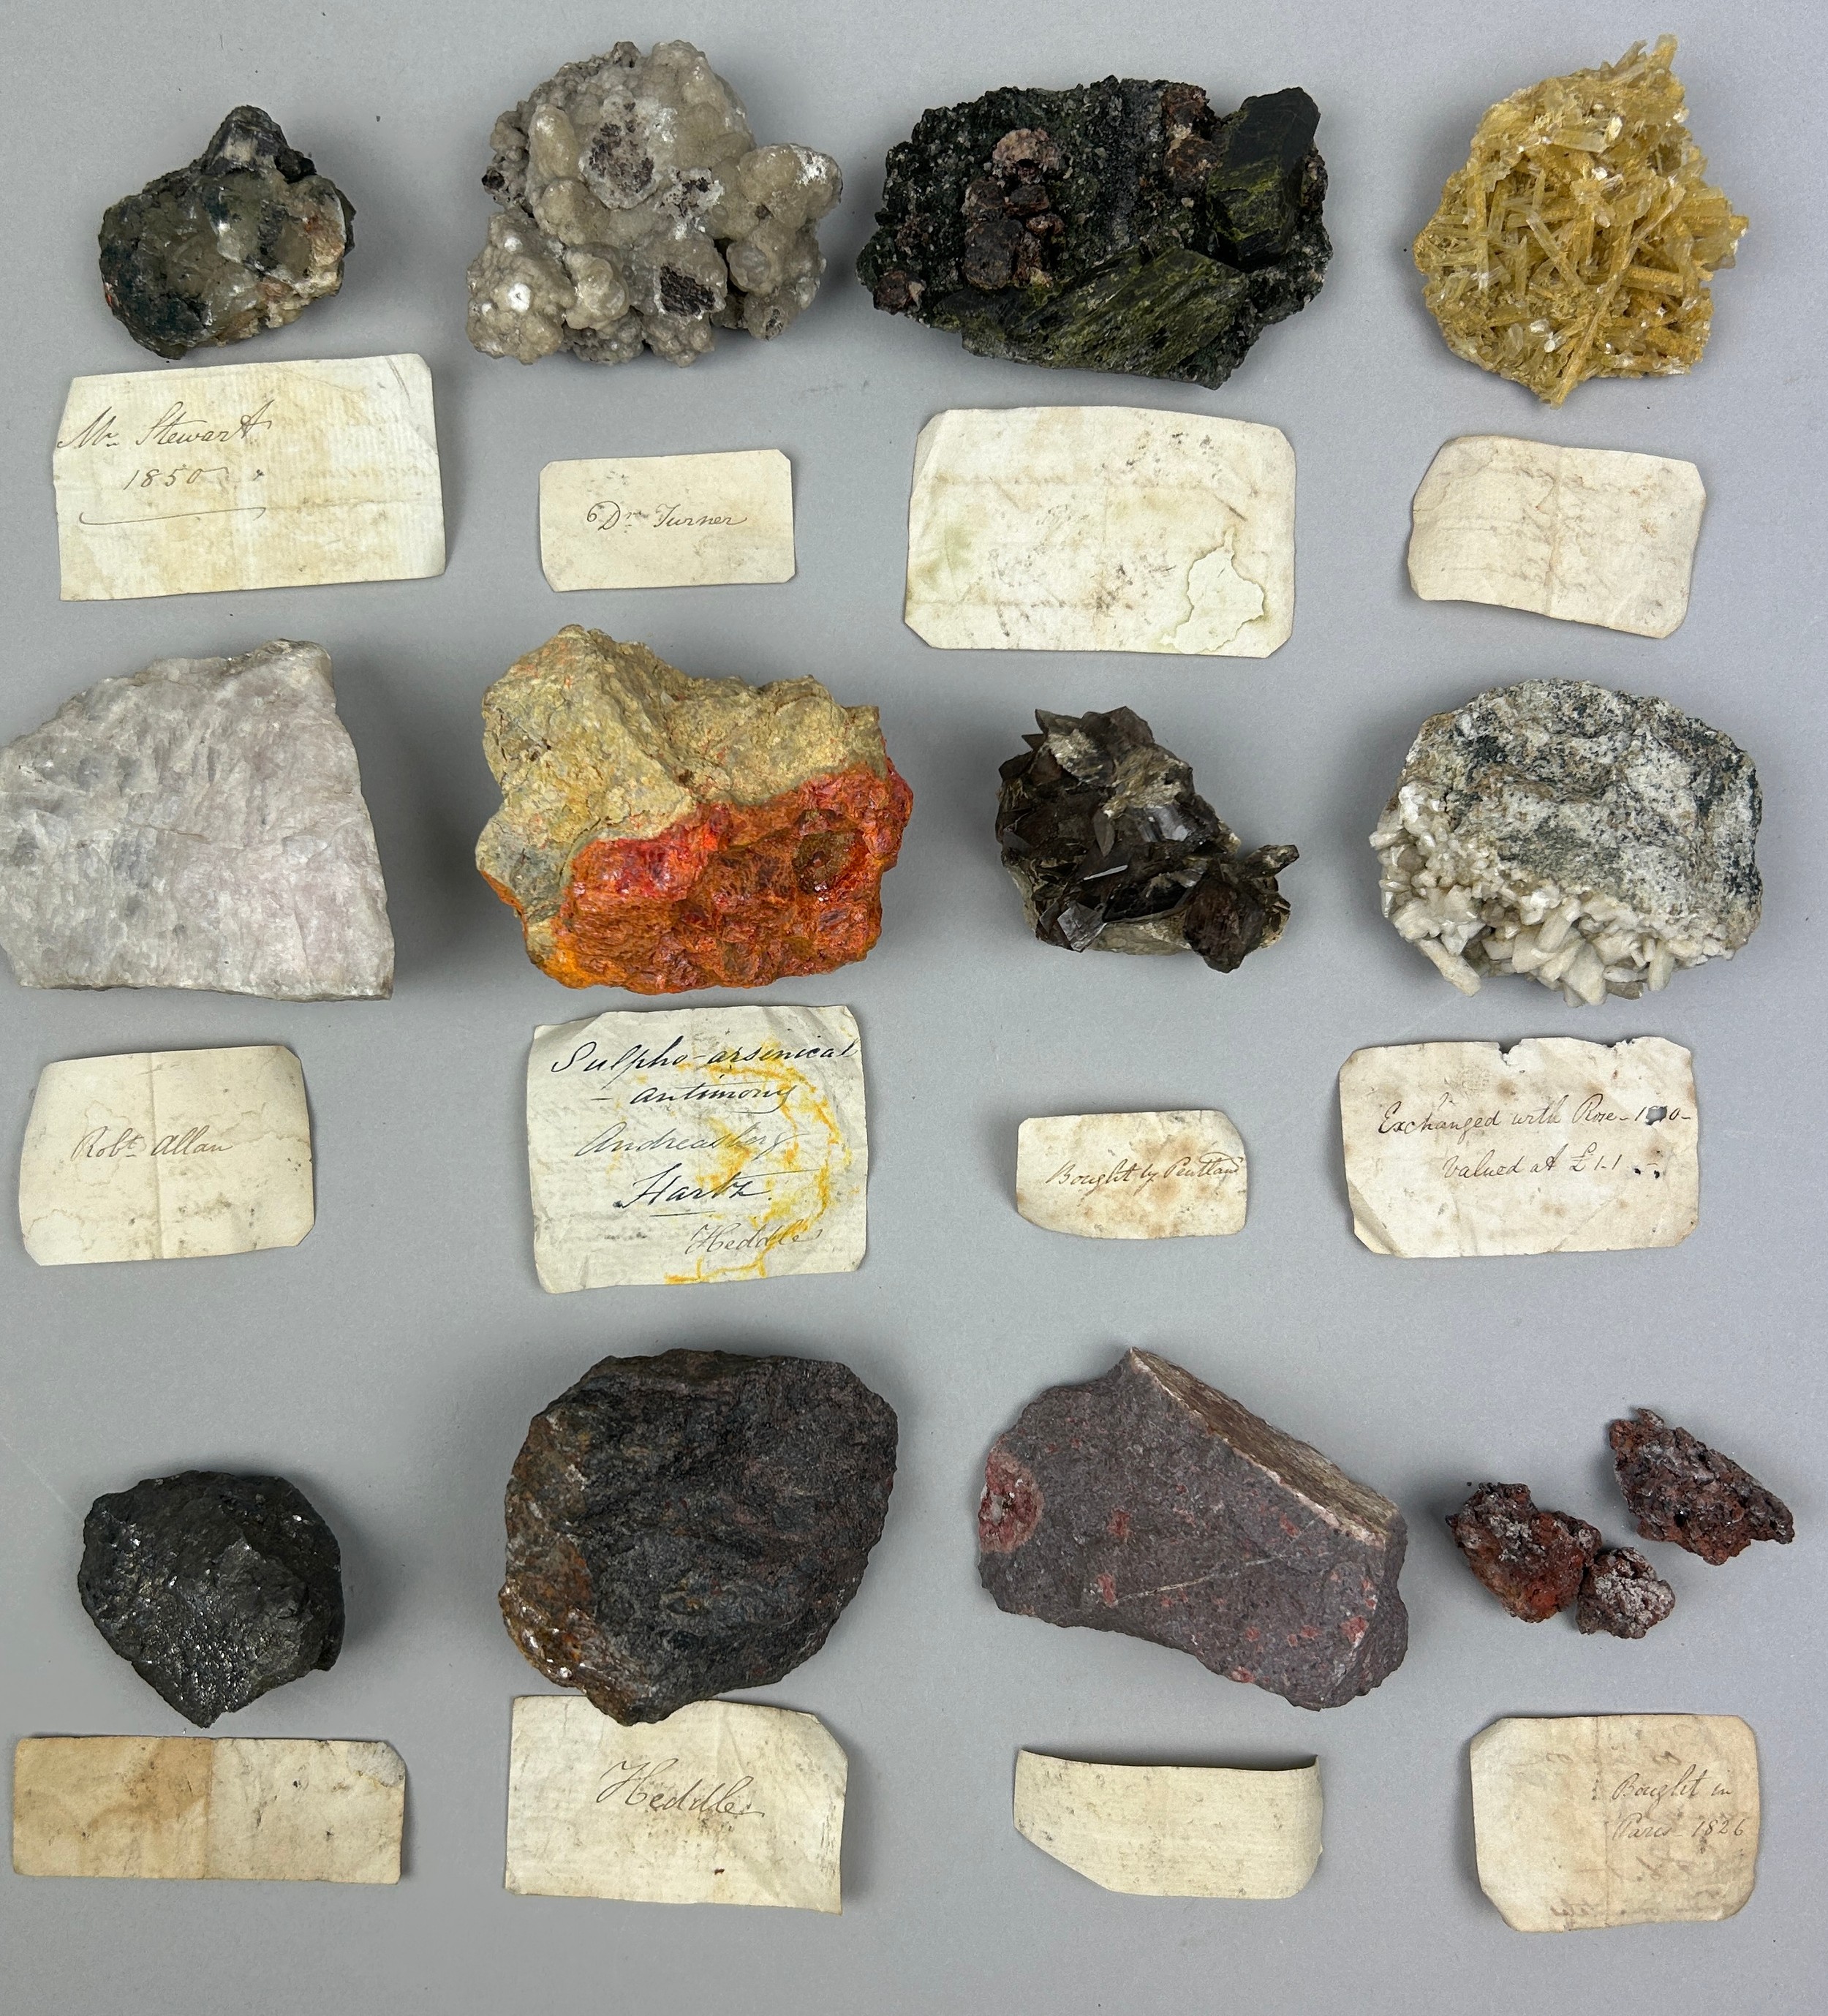 A RARE CABINET COLLECTION OF MINERALS CIRCA 1810-1860, including labels for some very important - Image 9 of 30